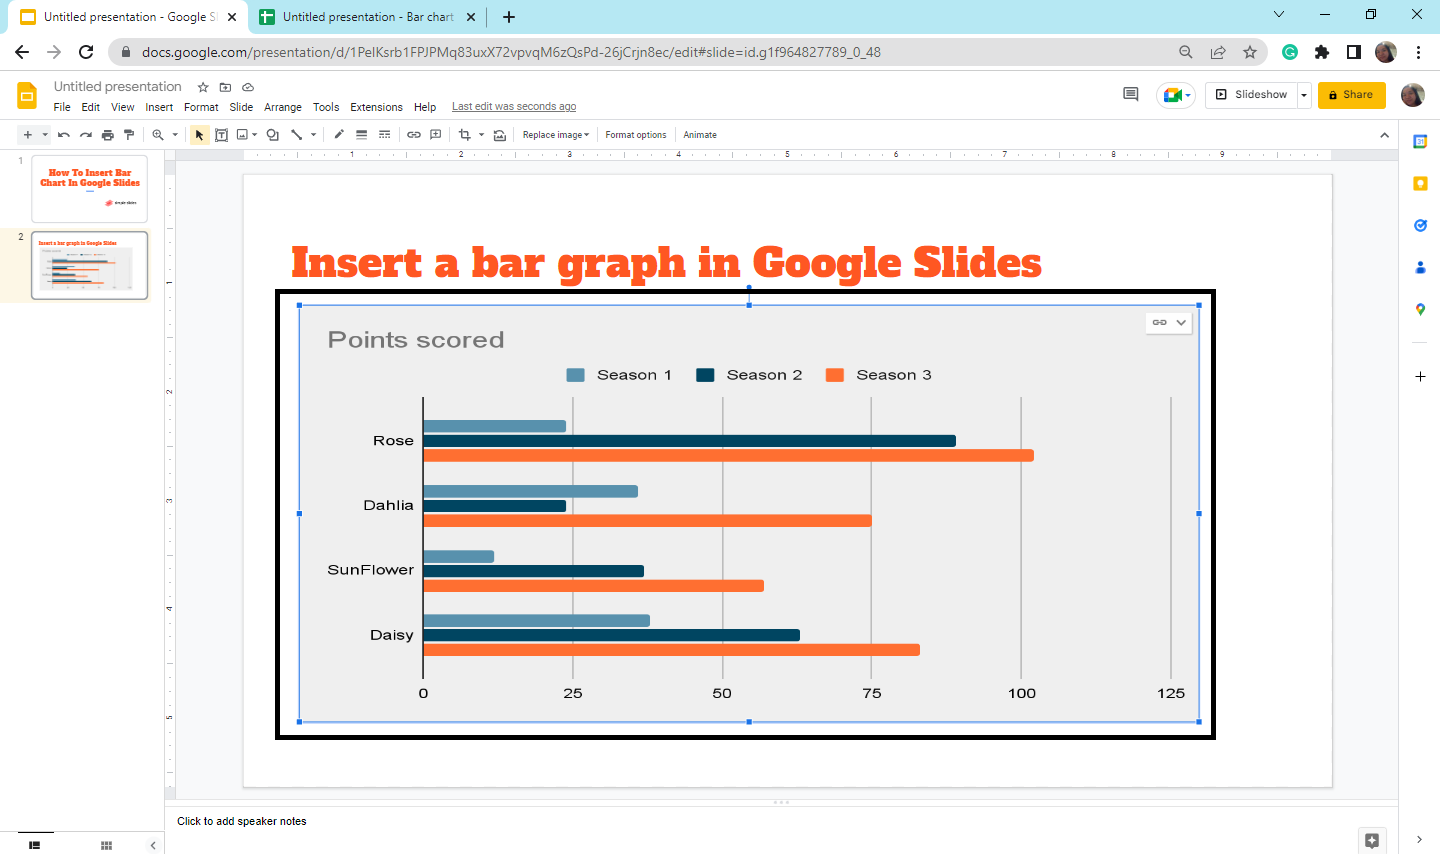 Once you select "update" button, your updated bar chart appears directly in Google Slides.